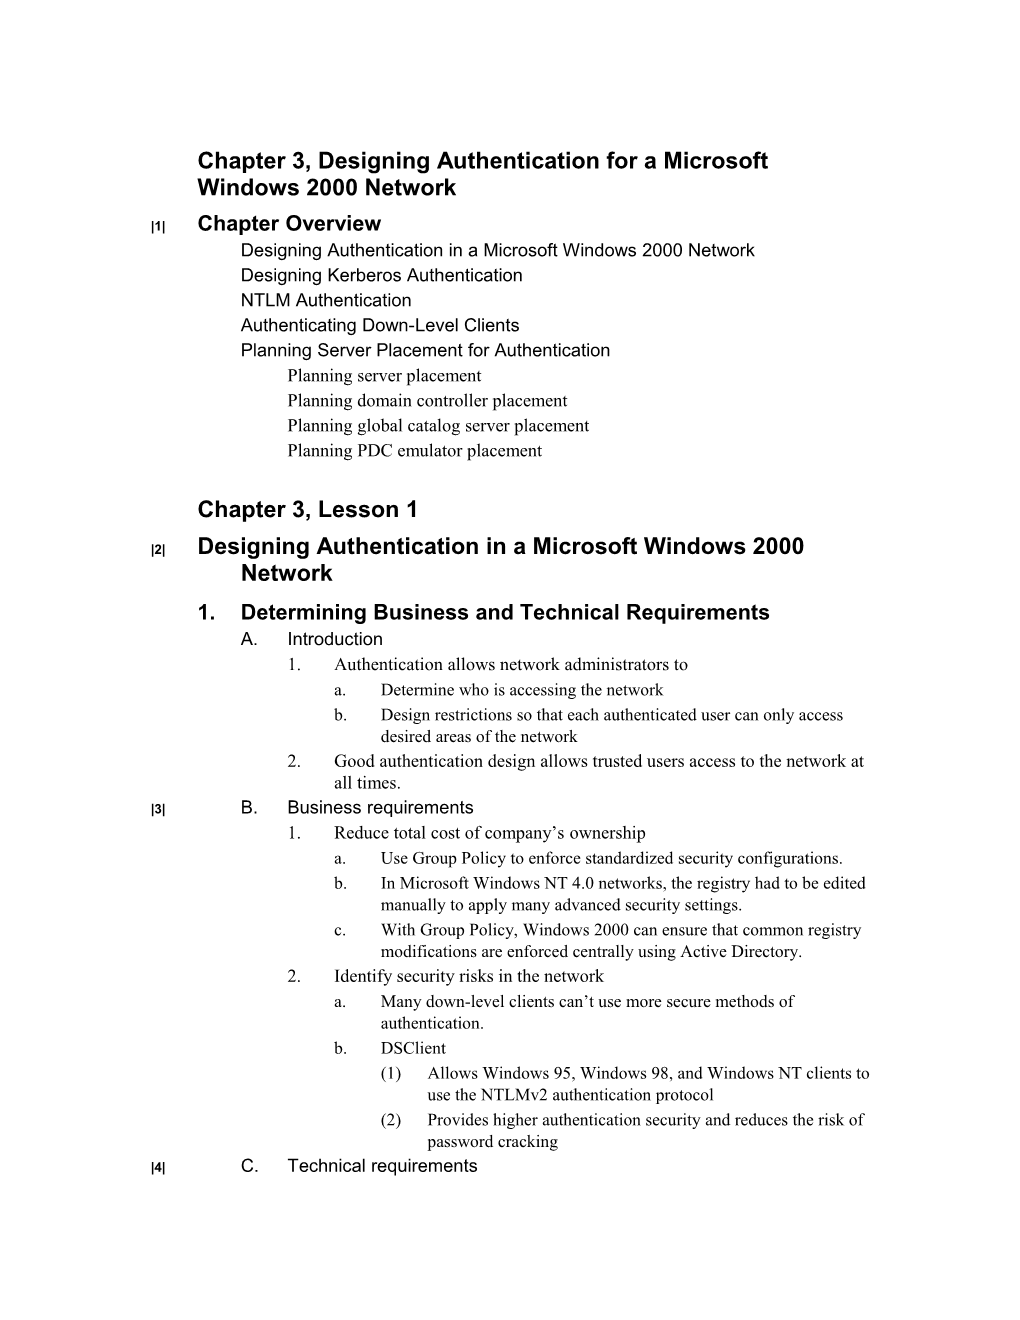 Chapter 3, Designing Authentication for a Microsoft Windows 2000 Network